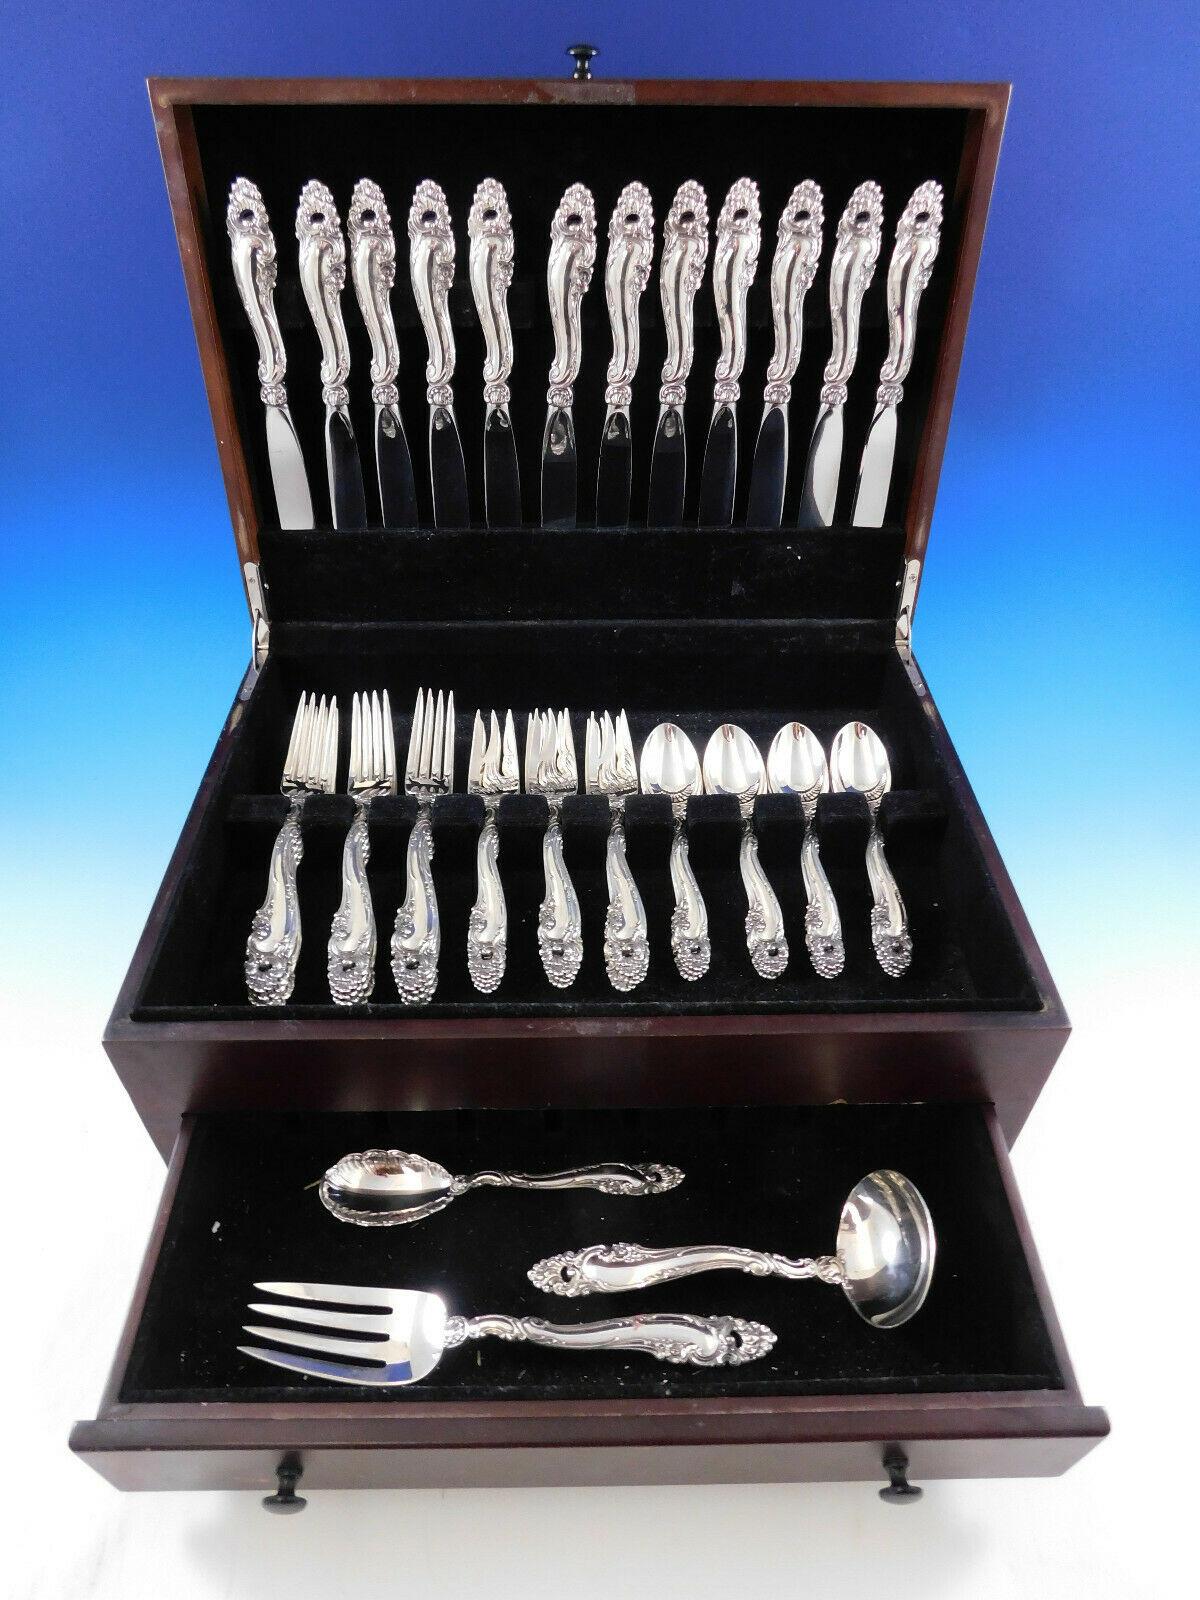 Large and heavy Dinner Size Decor by Gorham sterling silver flatware set - 51 pieces. This set includes:

12 Dinner Size Knives, 9 5/8